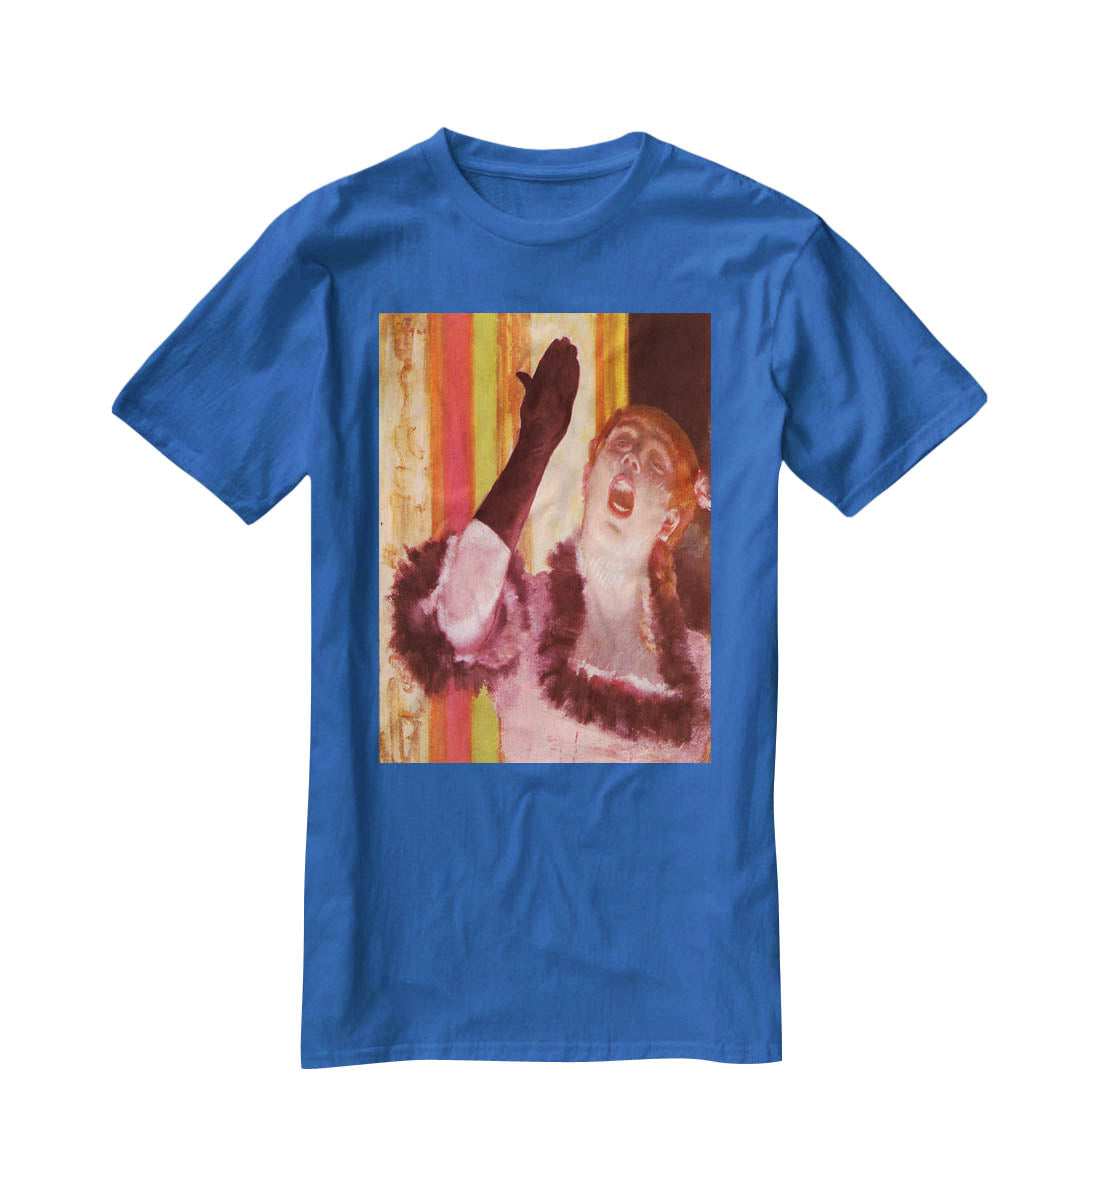 The singer with the glove by Degas T-Shirt - Canvas Art Rocks - 2